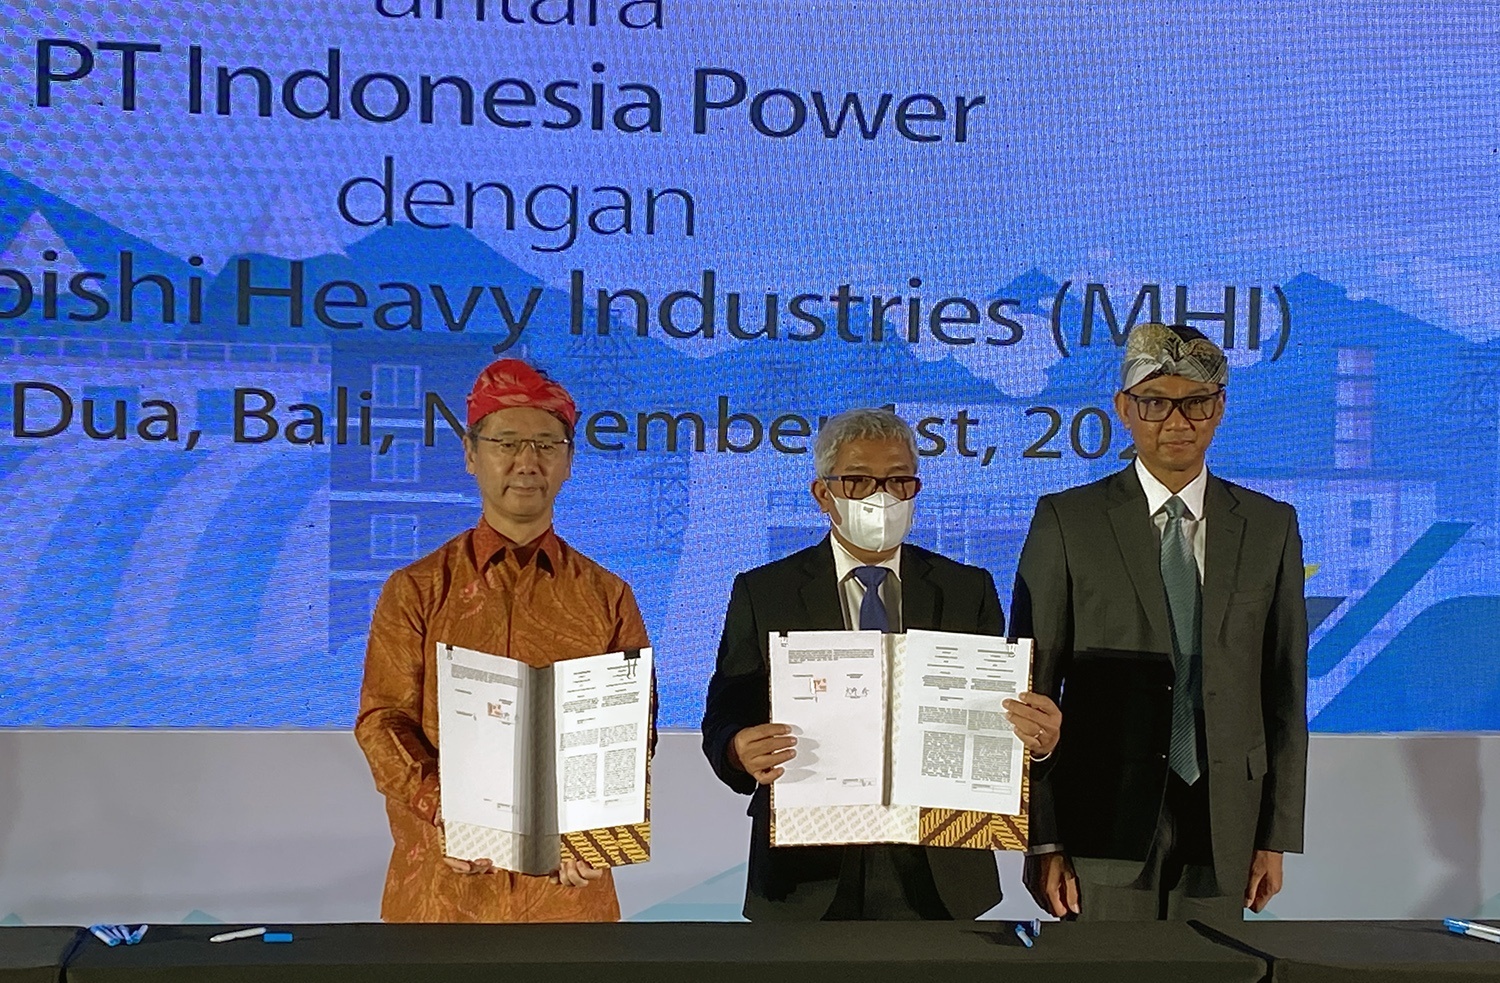 MHI and Indonesia Power research low-carbon power plants across Indonesia